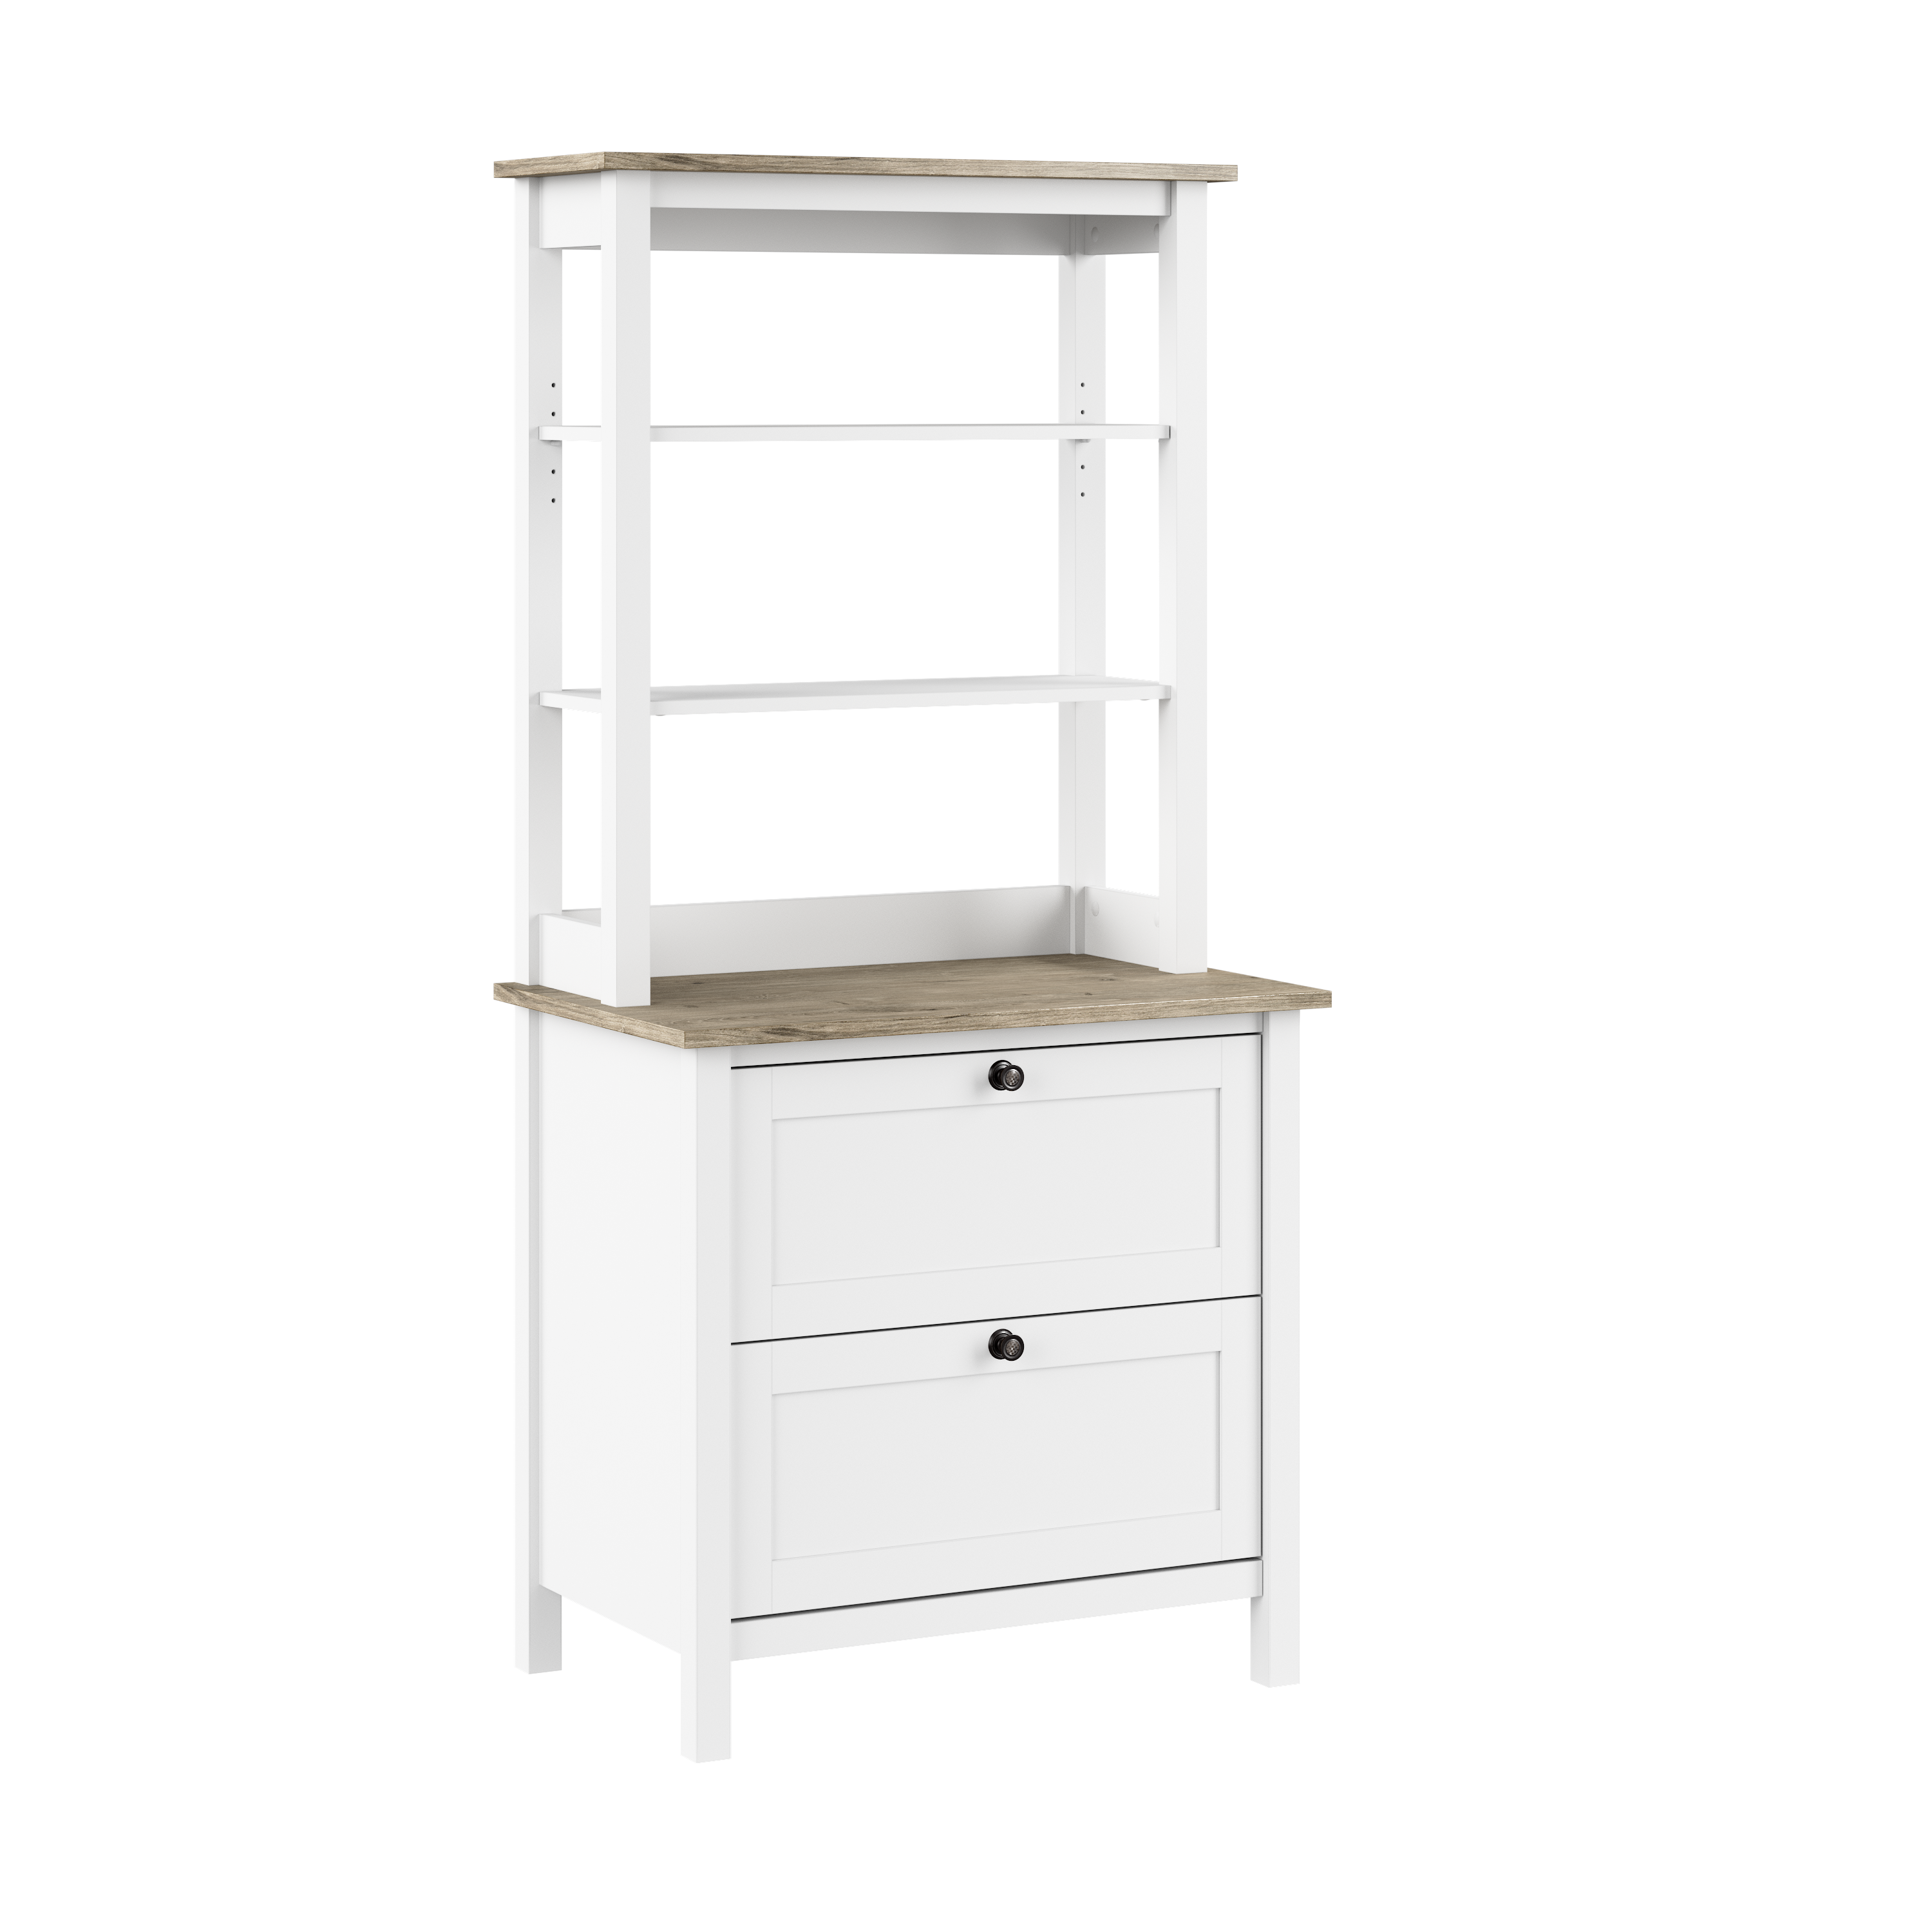 Shop Bush Furniture Mayfield Bookcase with Drawers 02 MAY018GW2 #color_shiplap gray/pure white